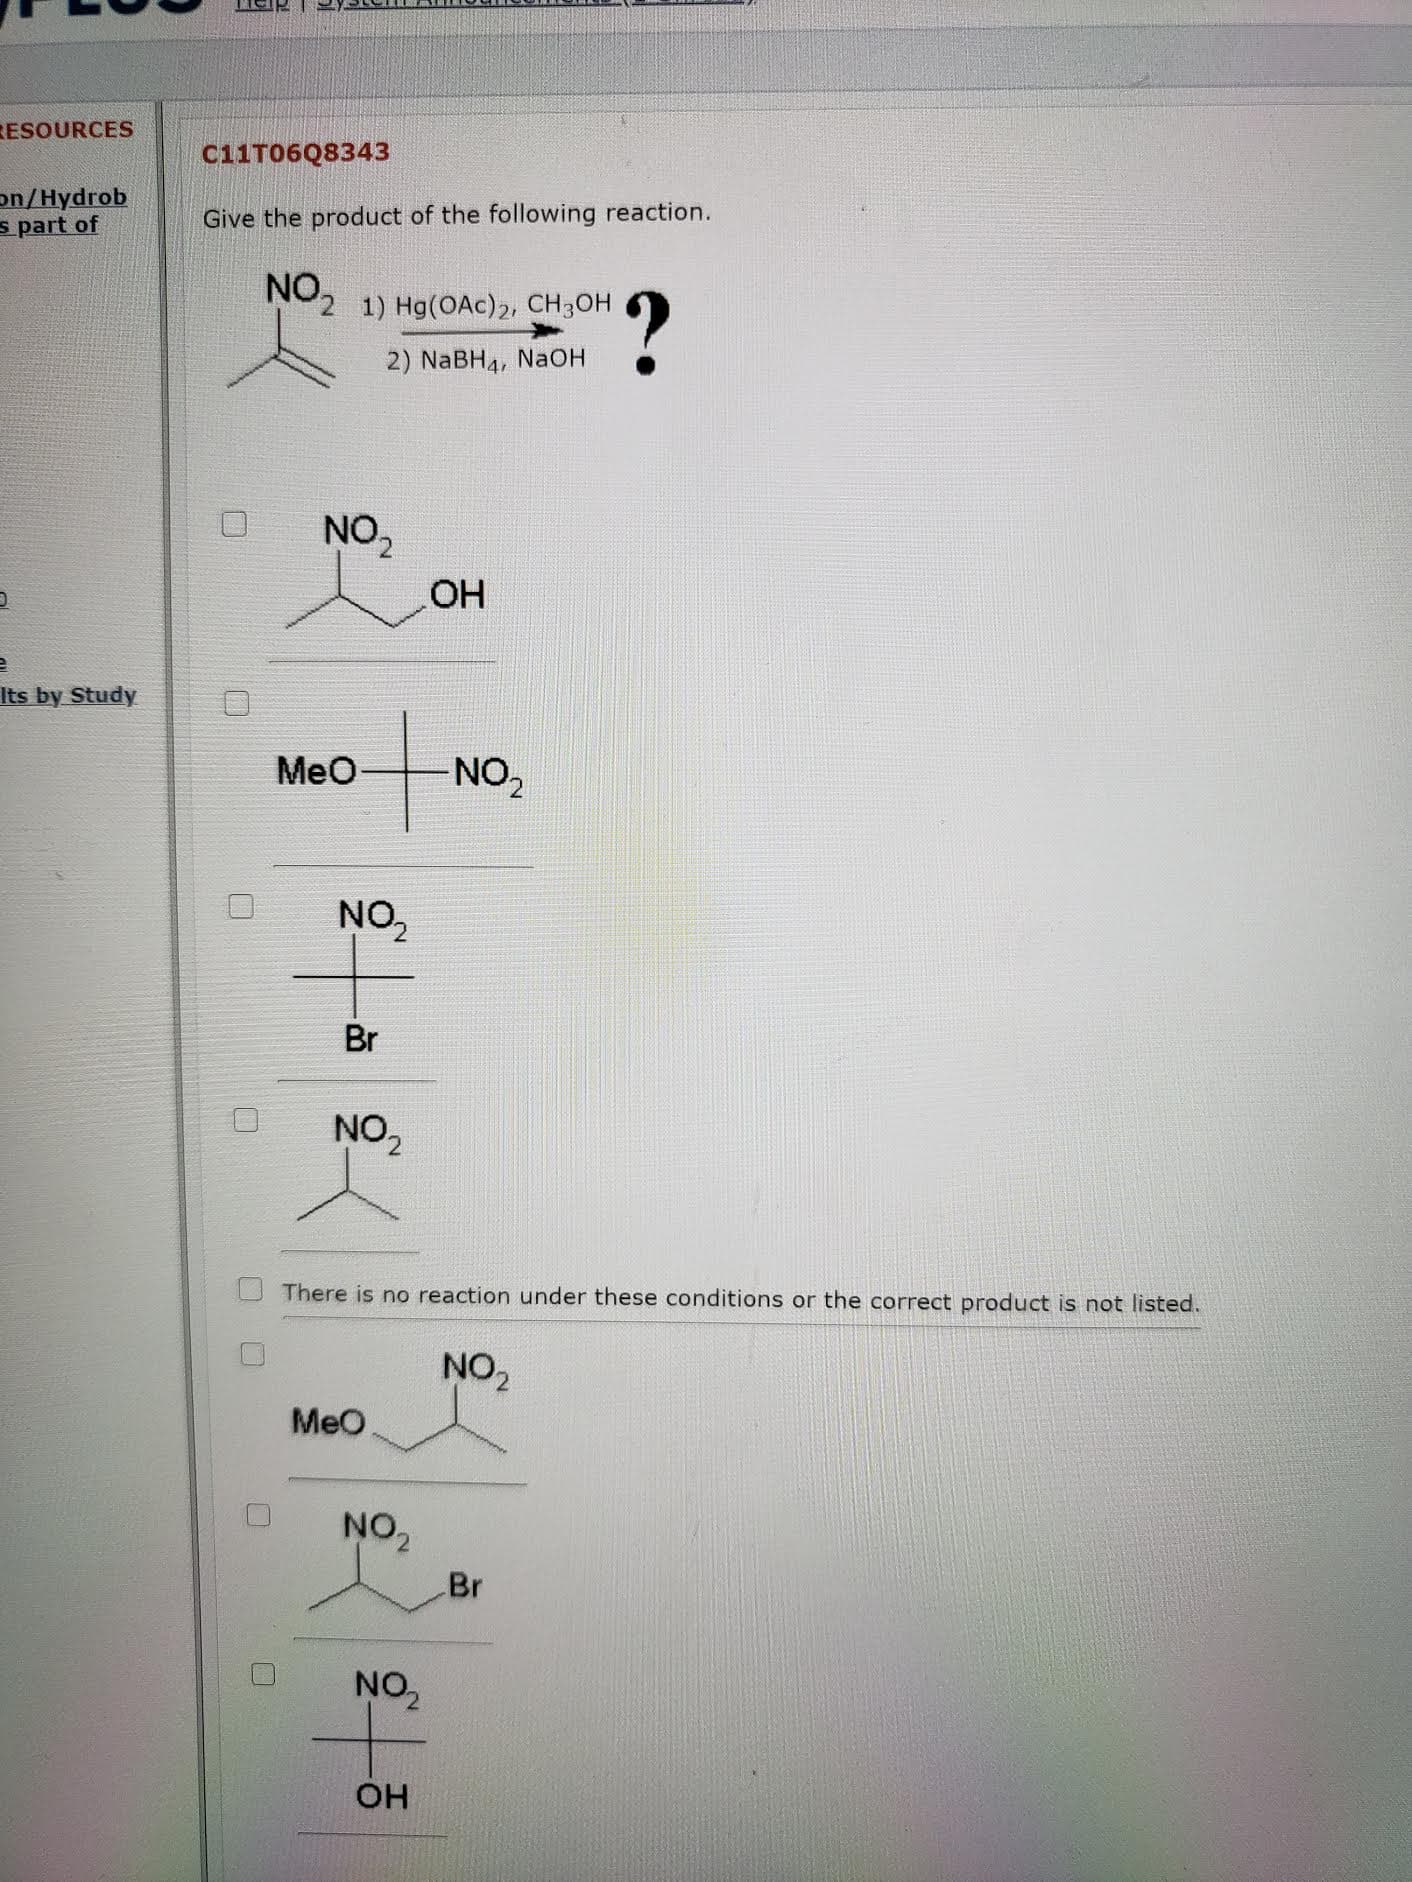 Give the product of the following reaction.
NO.
1) Hg(OAc)2, CH3OH
2) NABH4, NAOH
NO.
OH
Meo
NO,
NO,
Br
NO,
There is no reaction under these conditions or the correct product is not liste
NO,
MeO
NO,
Br
